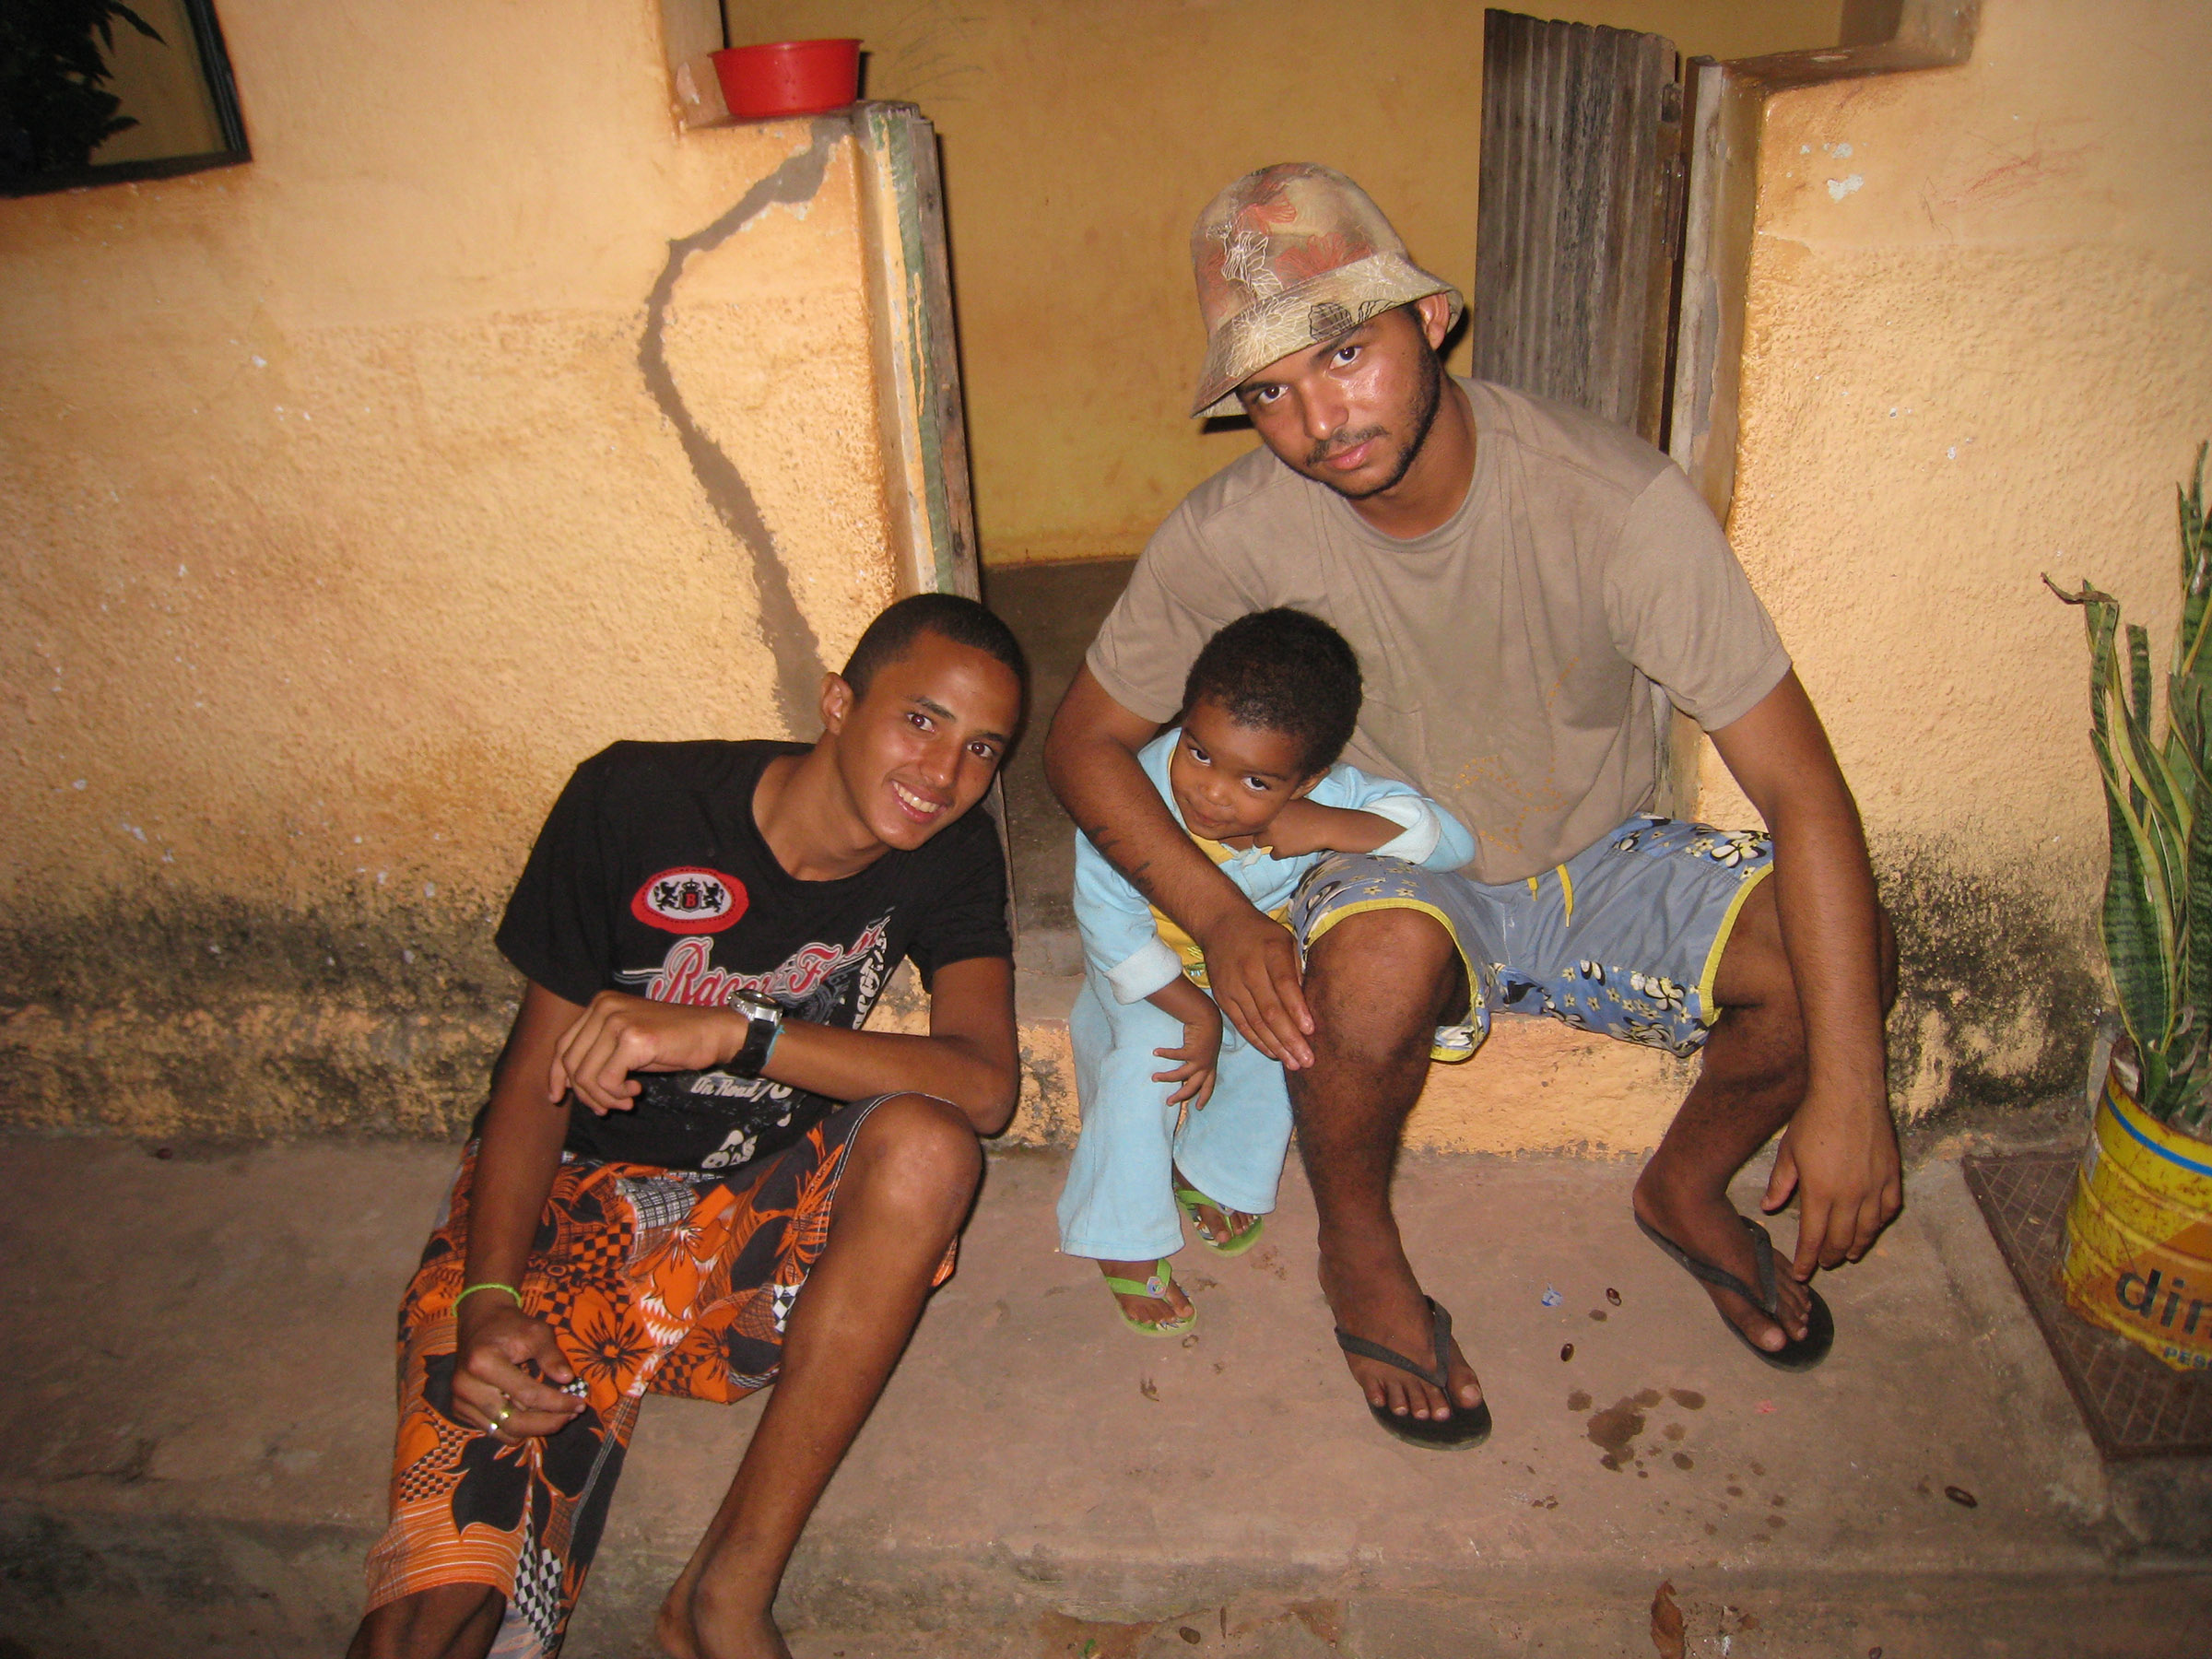 Two boys and a young man sit outside a rural building, smiling.